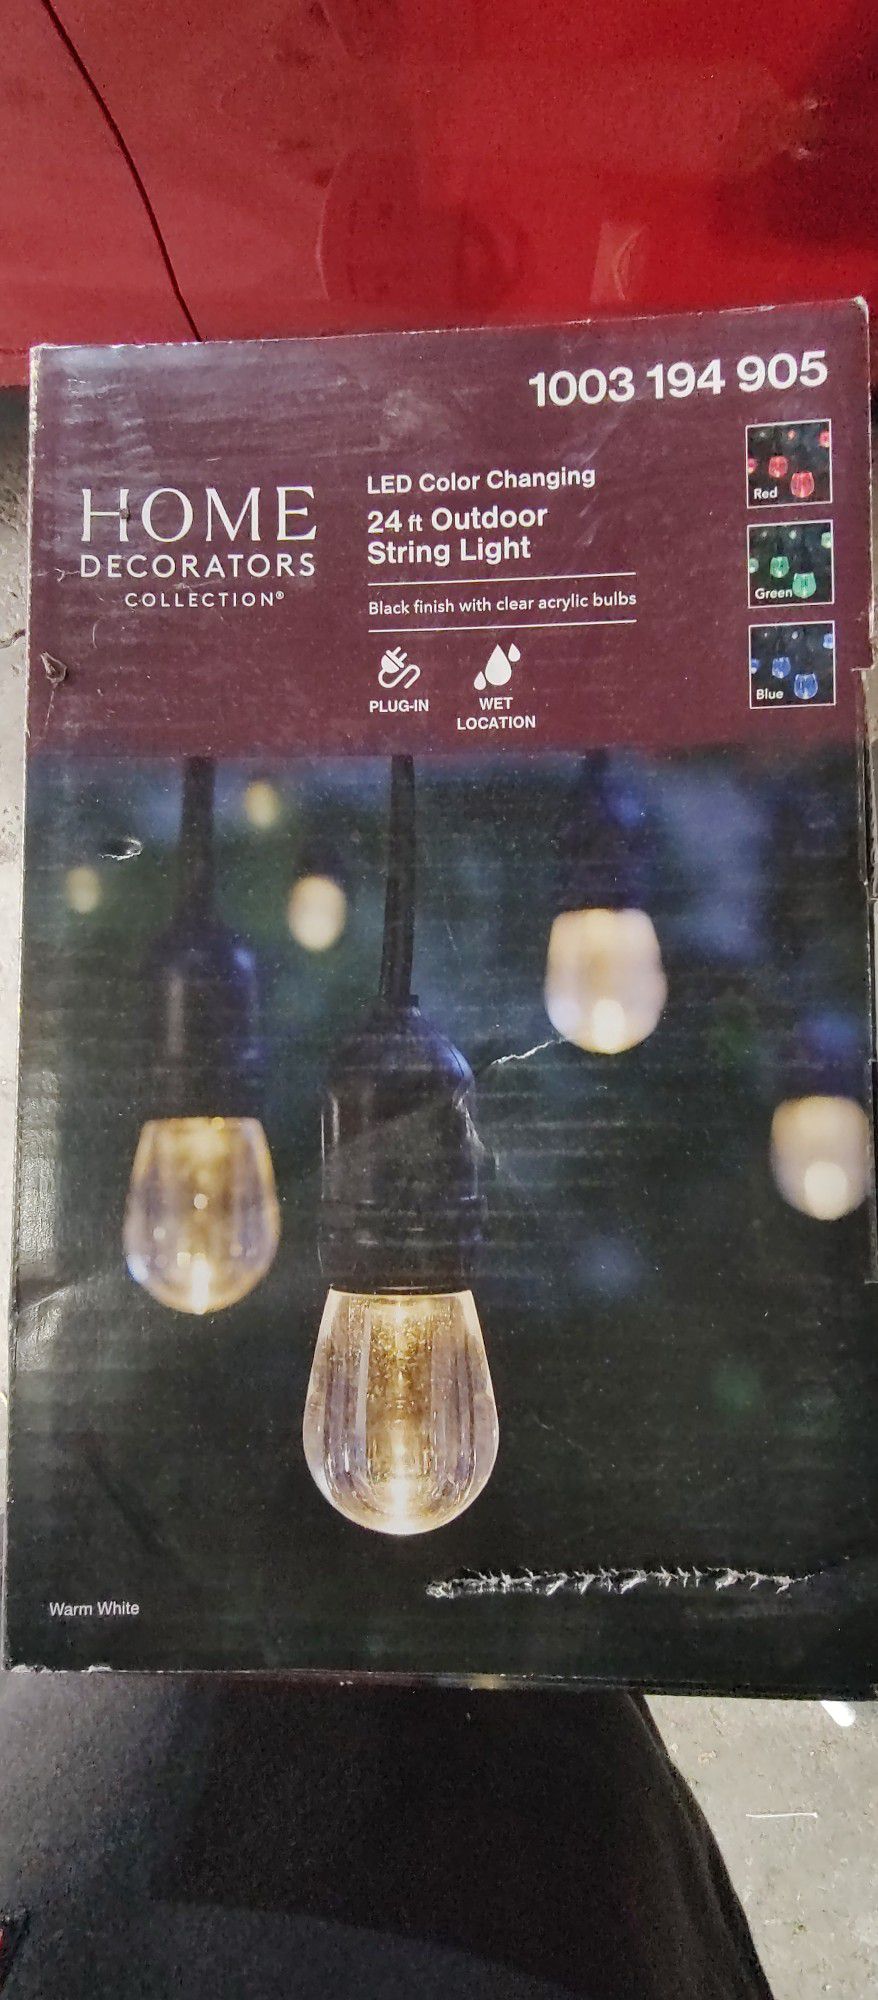 Home Decorators Collection Yard Lights LED Brand New 